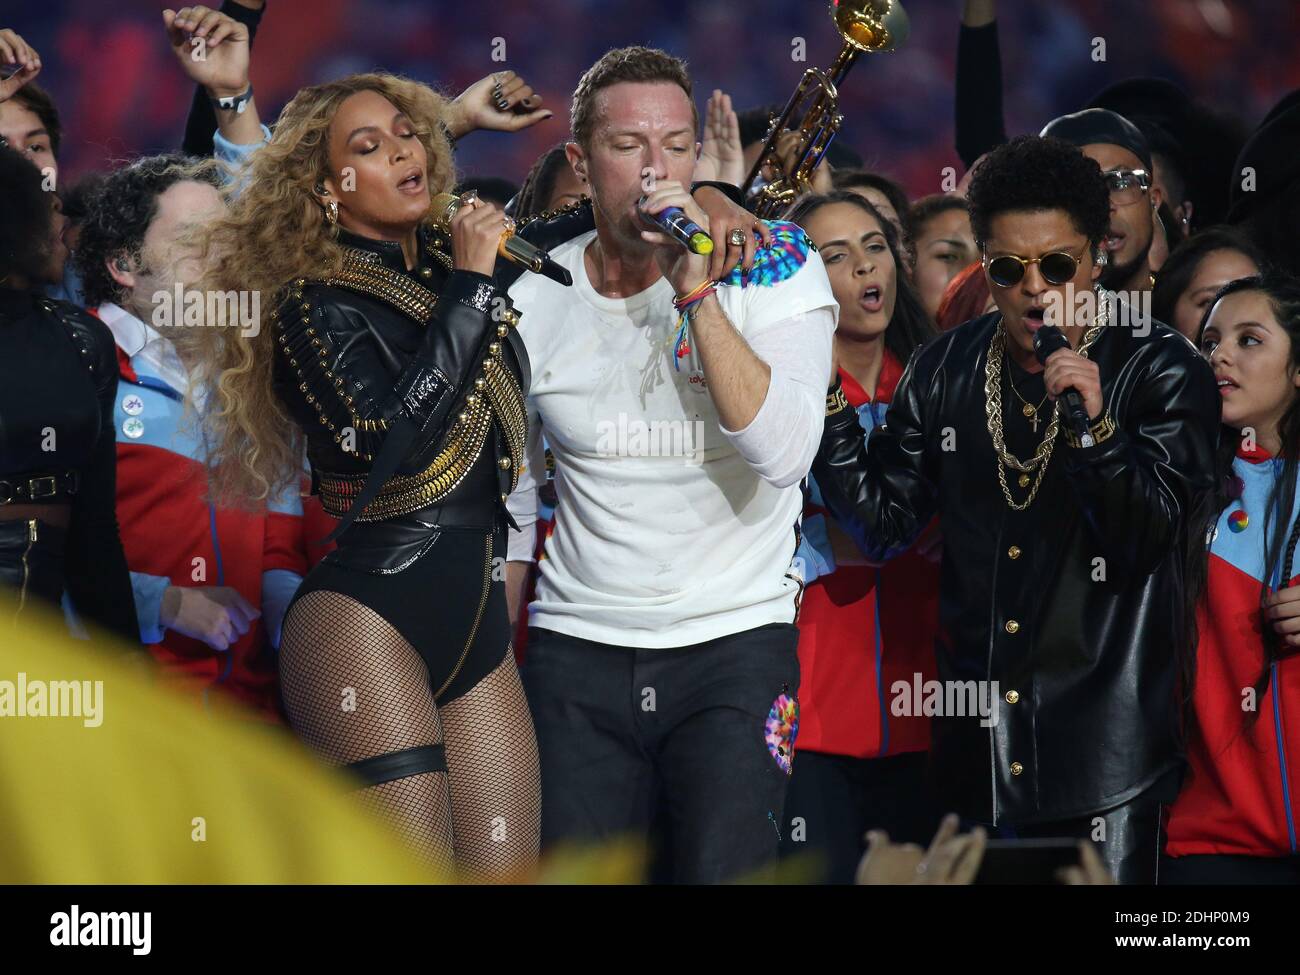 Beyonce, Chris Martin of Coldplay and Bruno Mars perform onstage during the  Pepsi Super Bowl 50 Halftime Show at Levi's Stadium on February 7, 2016 in  Santa Clara, CA, USA. Photo by